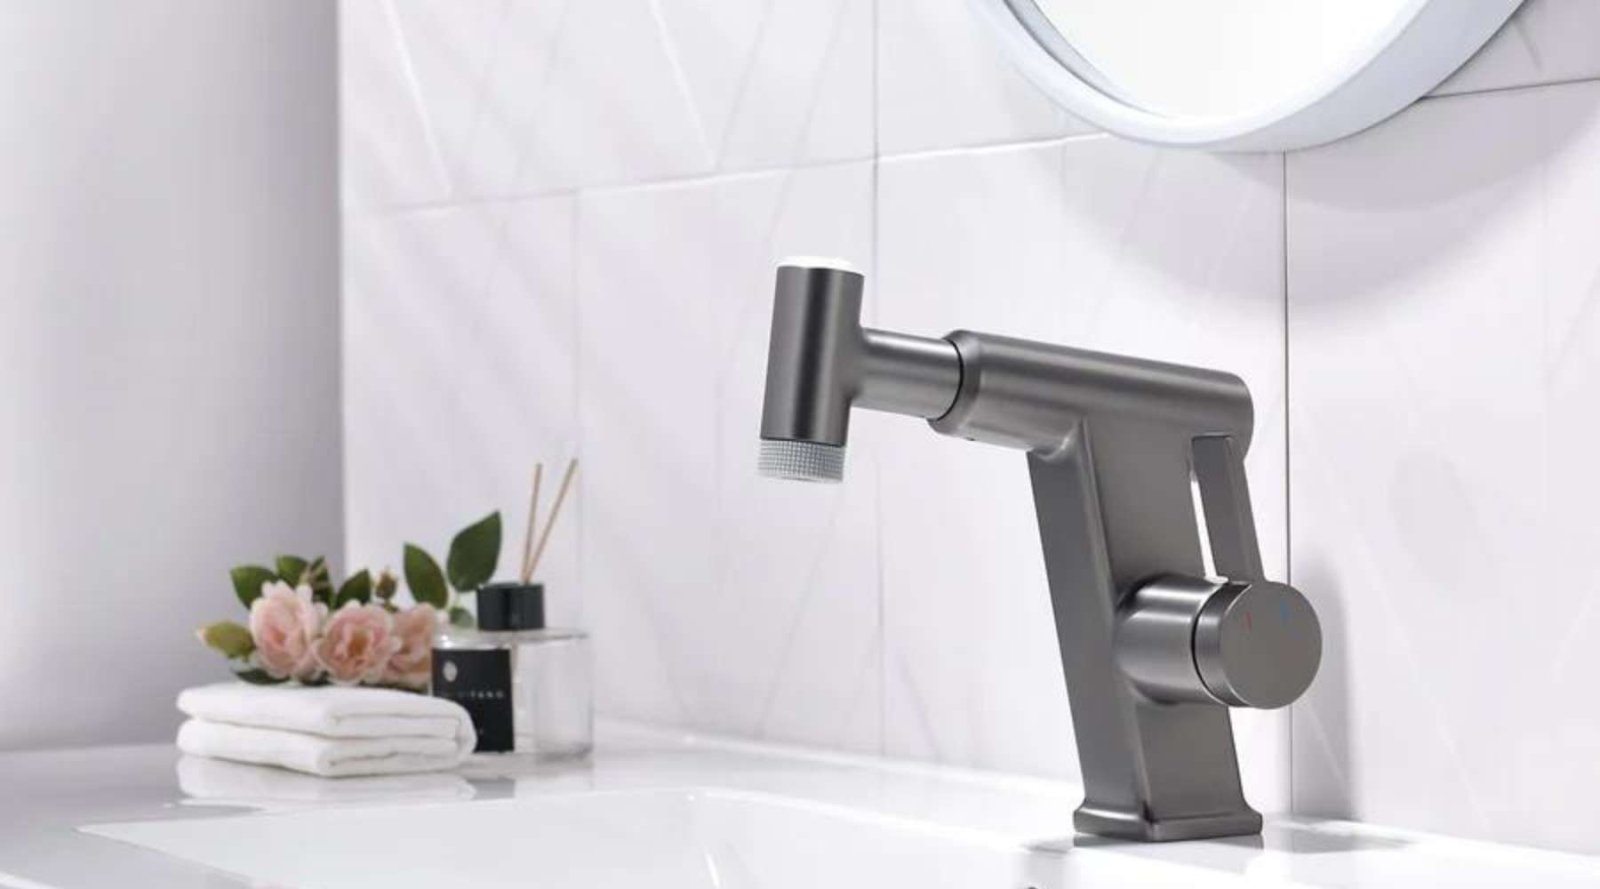 How to Install a Bathroom Sink Faucet? - Lefton Home